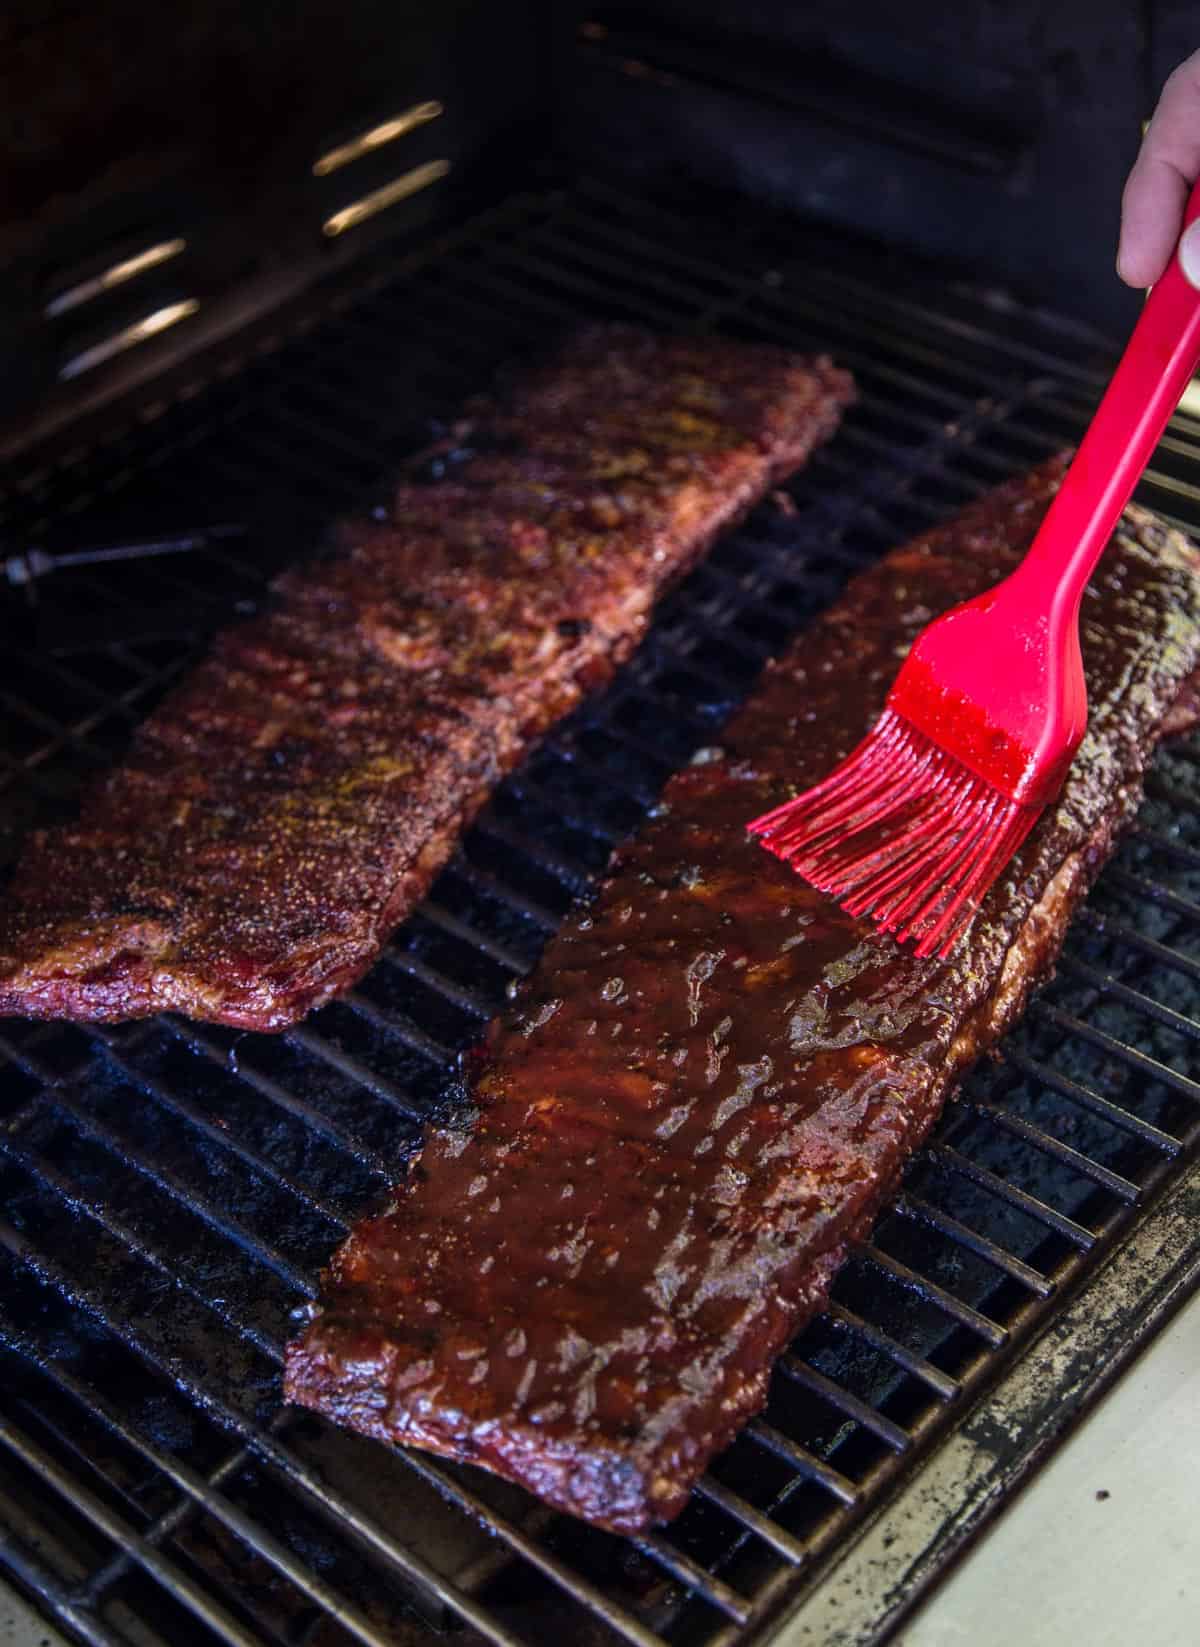 Ribs on the MAK Grill saucing with a basting brush which is an essential grilling accesories.